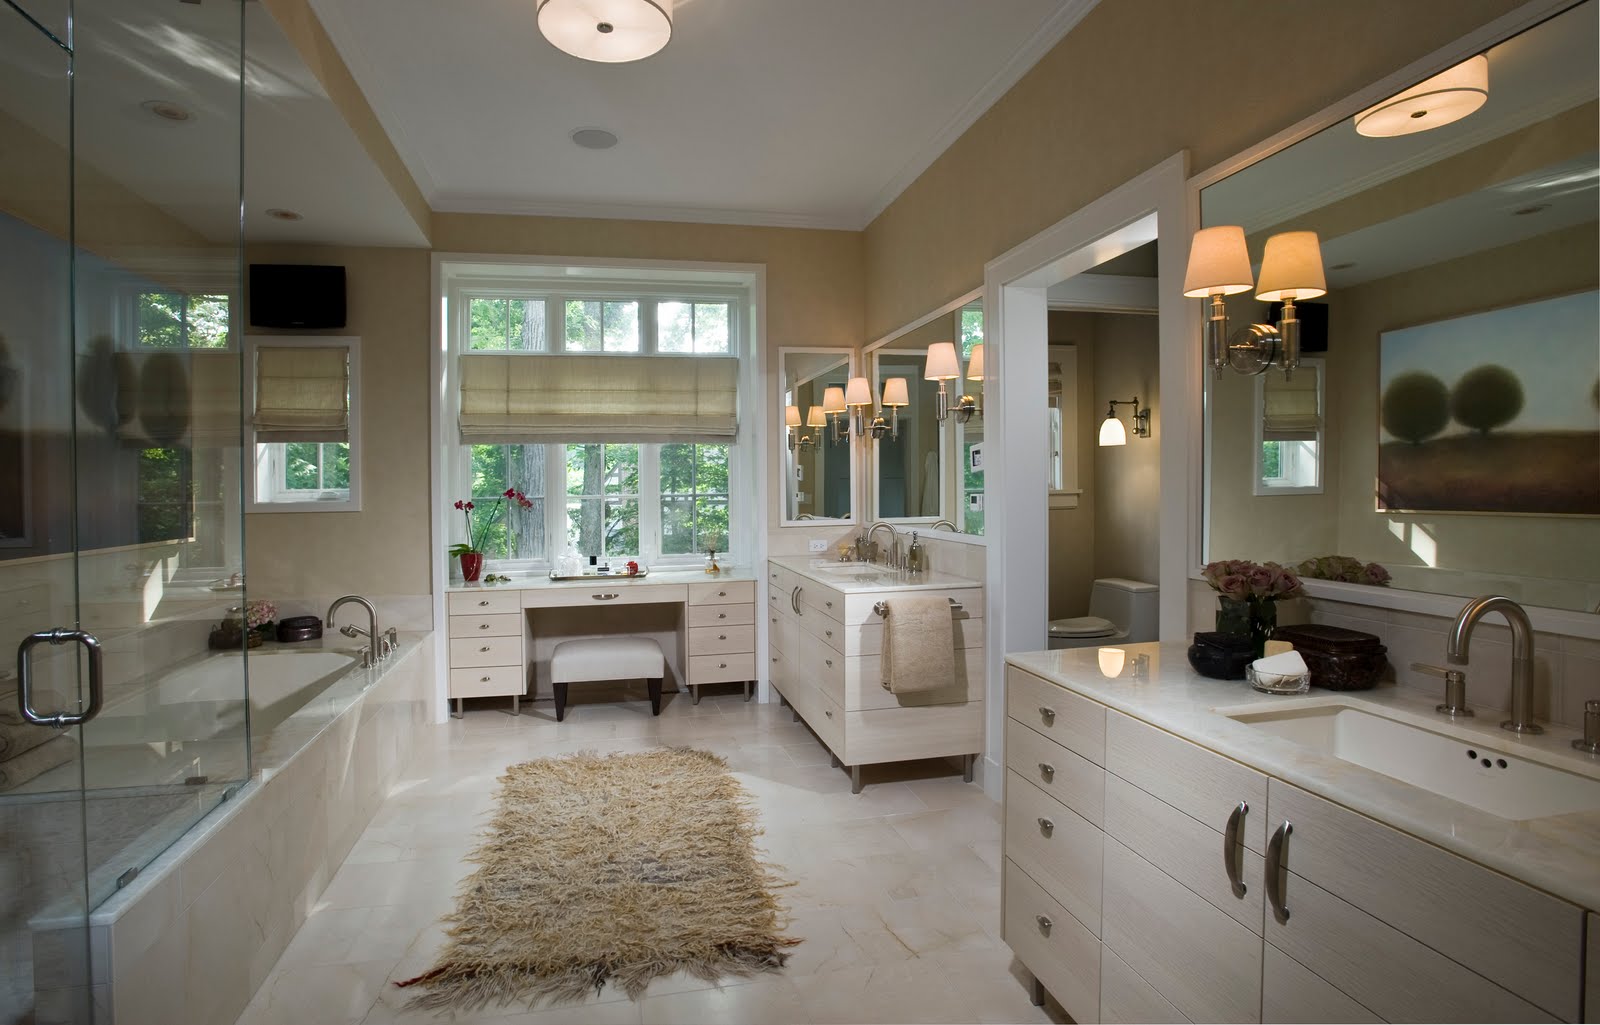 MOST BEAUTIFUL DESIGN FOR YOUR MASTER BATHROOM